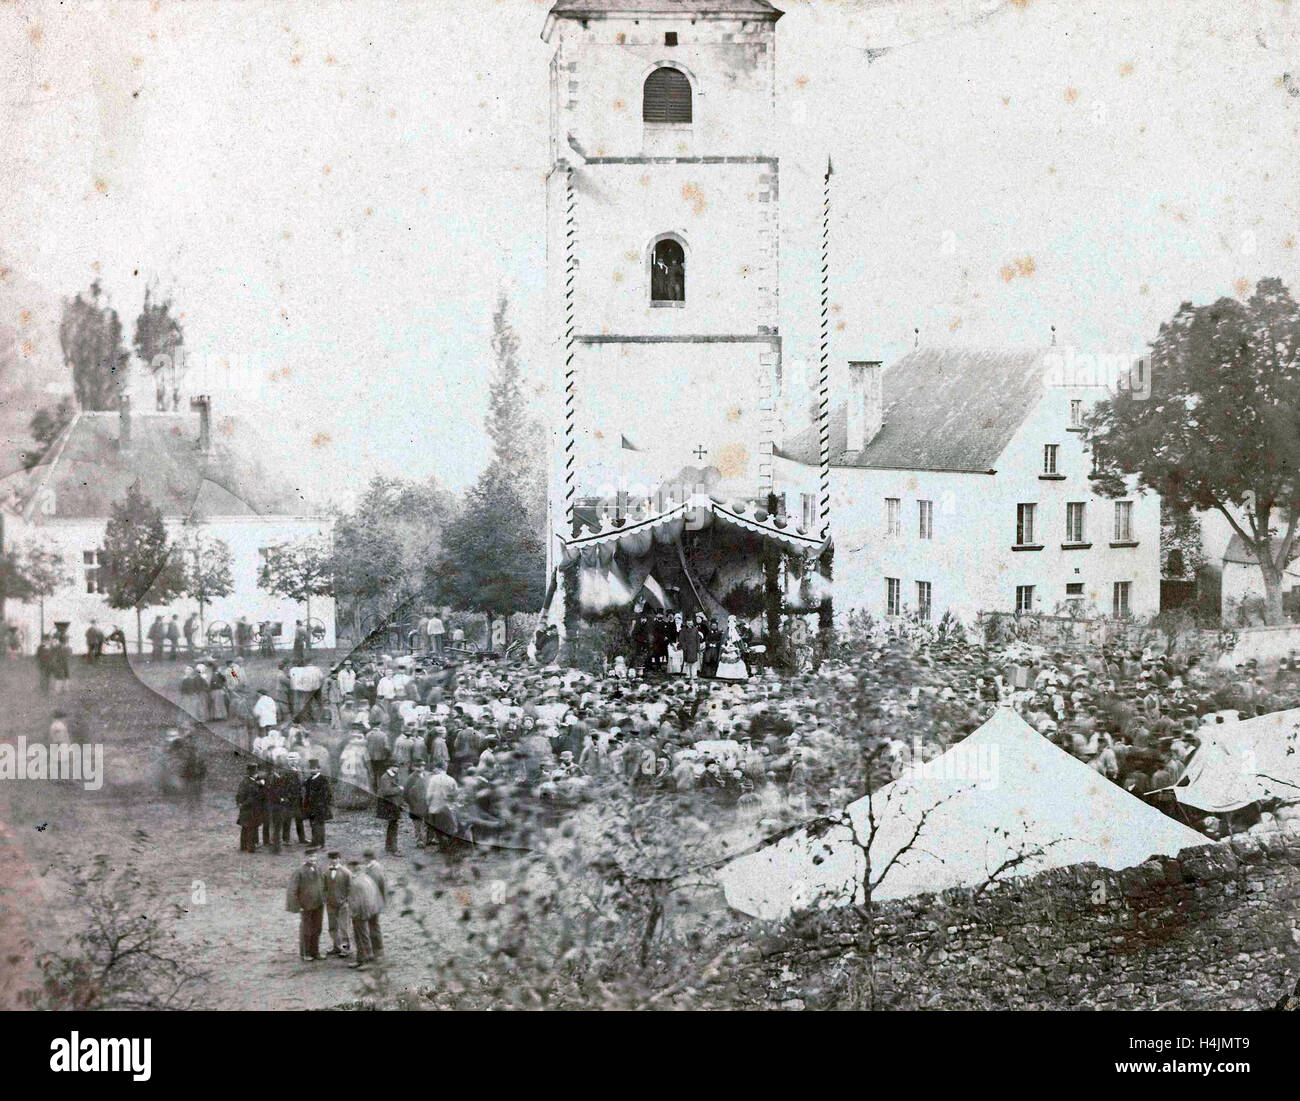 View crowd at marquee for a tower at unknown location in the Netherlands, unknown, c. 1865 - c. 1870 Stock Photo